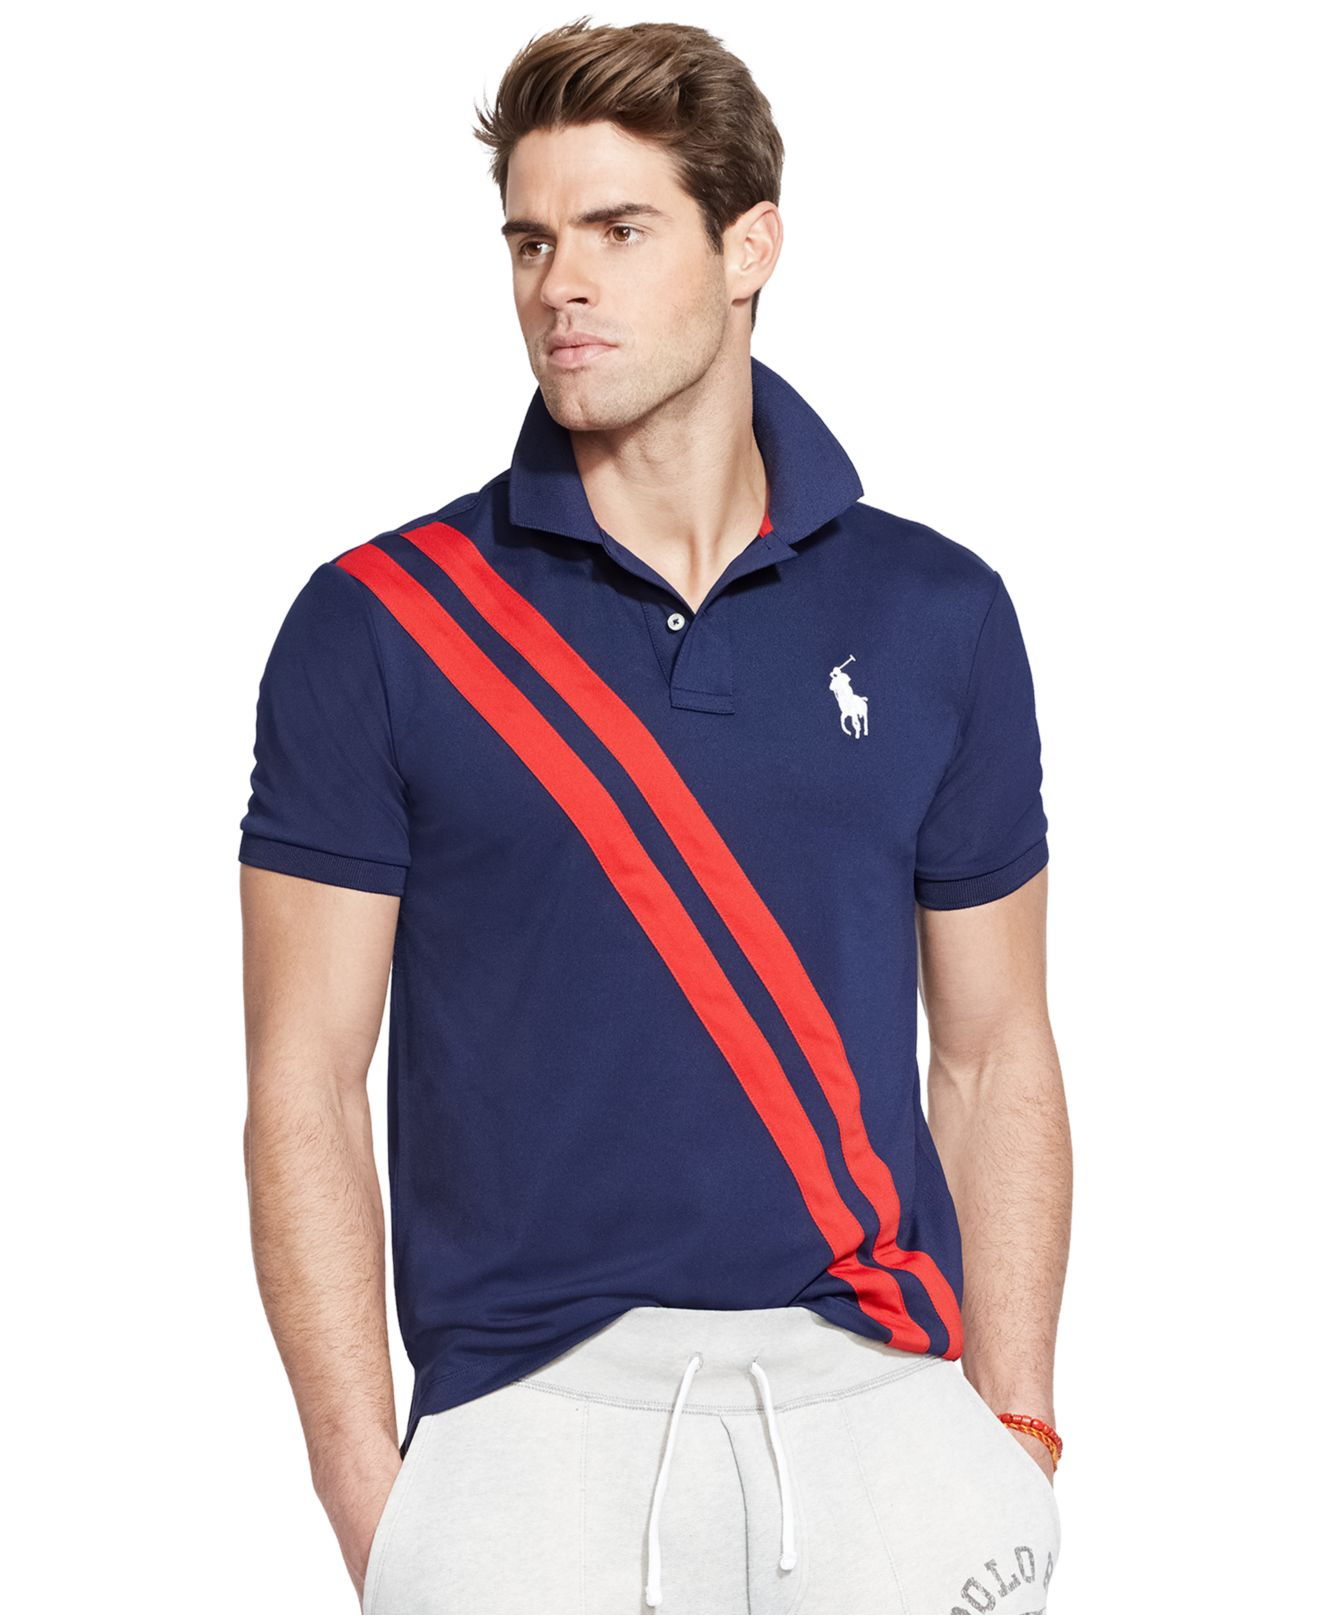 Lyst - Polo Ralph Lauren Banner-striped Mesh Performance Polo in Blue ...